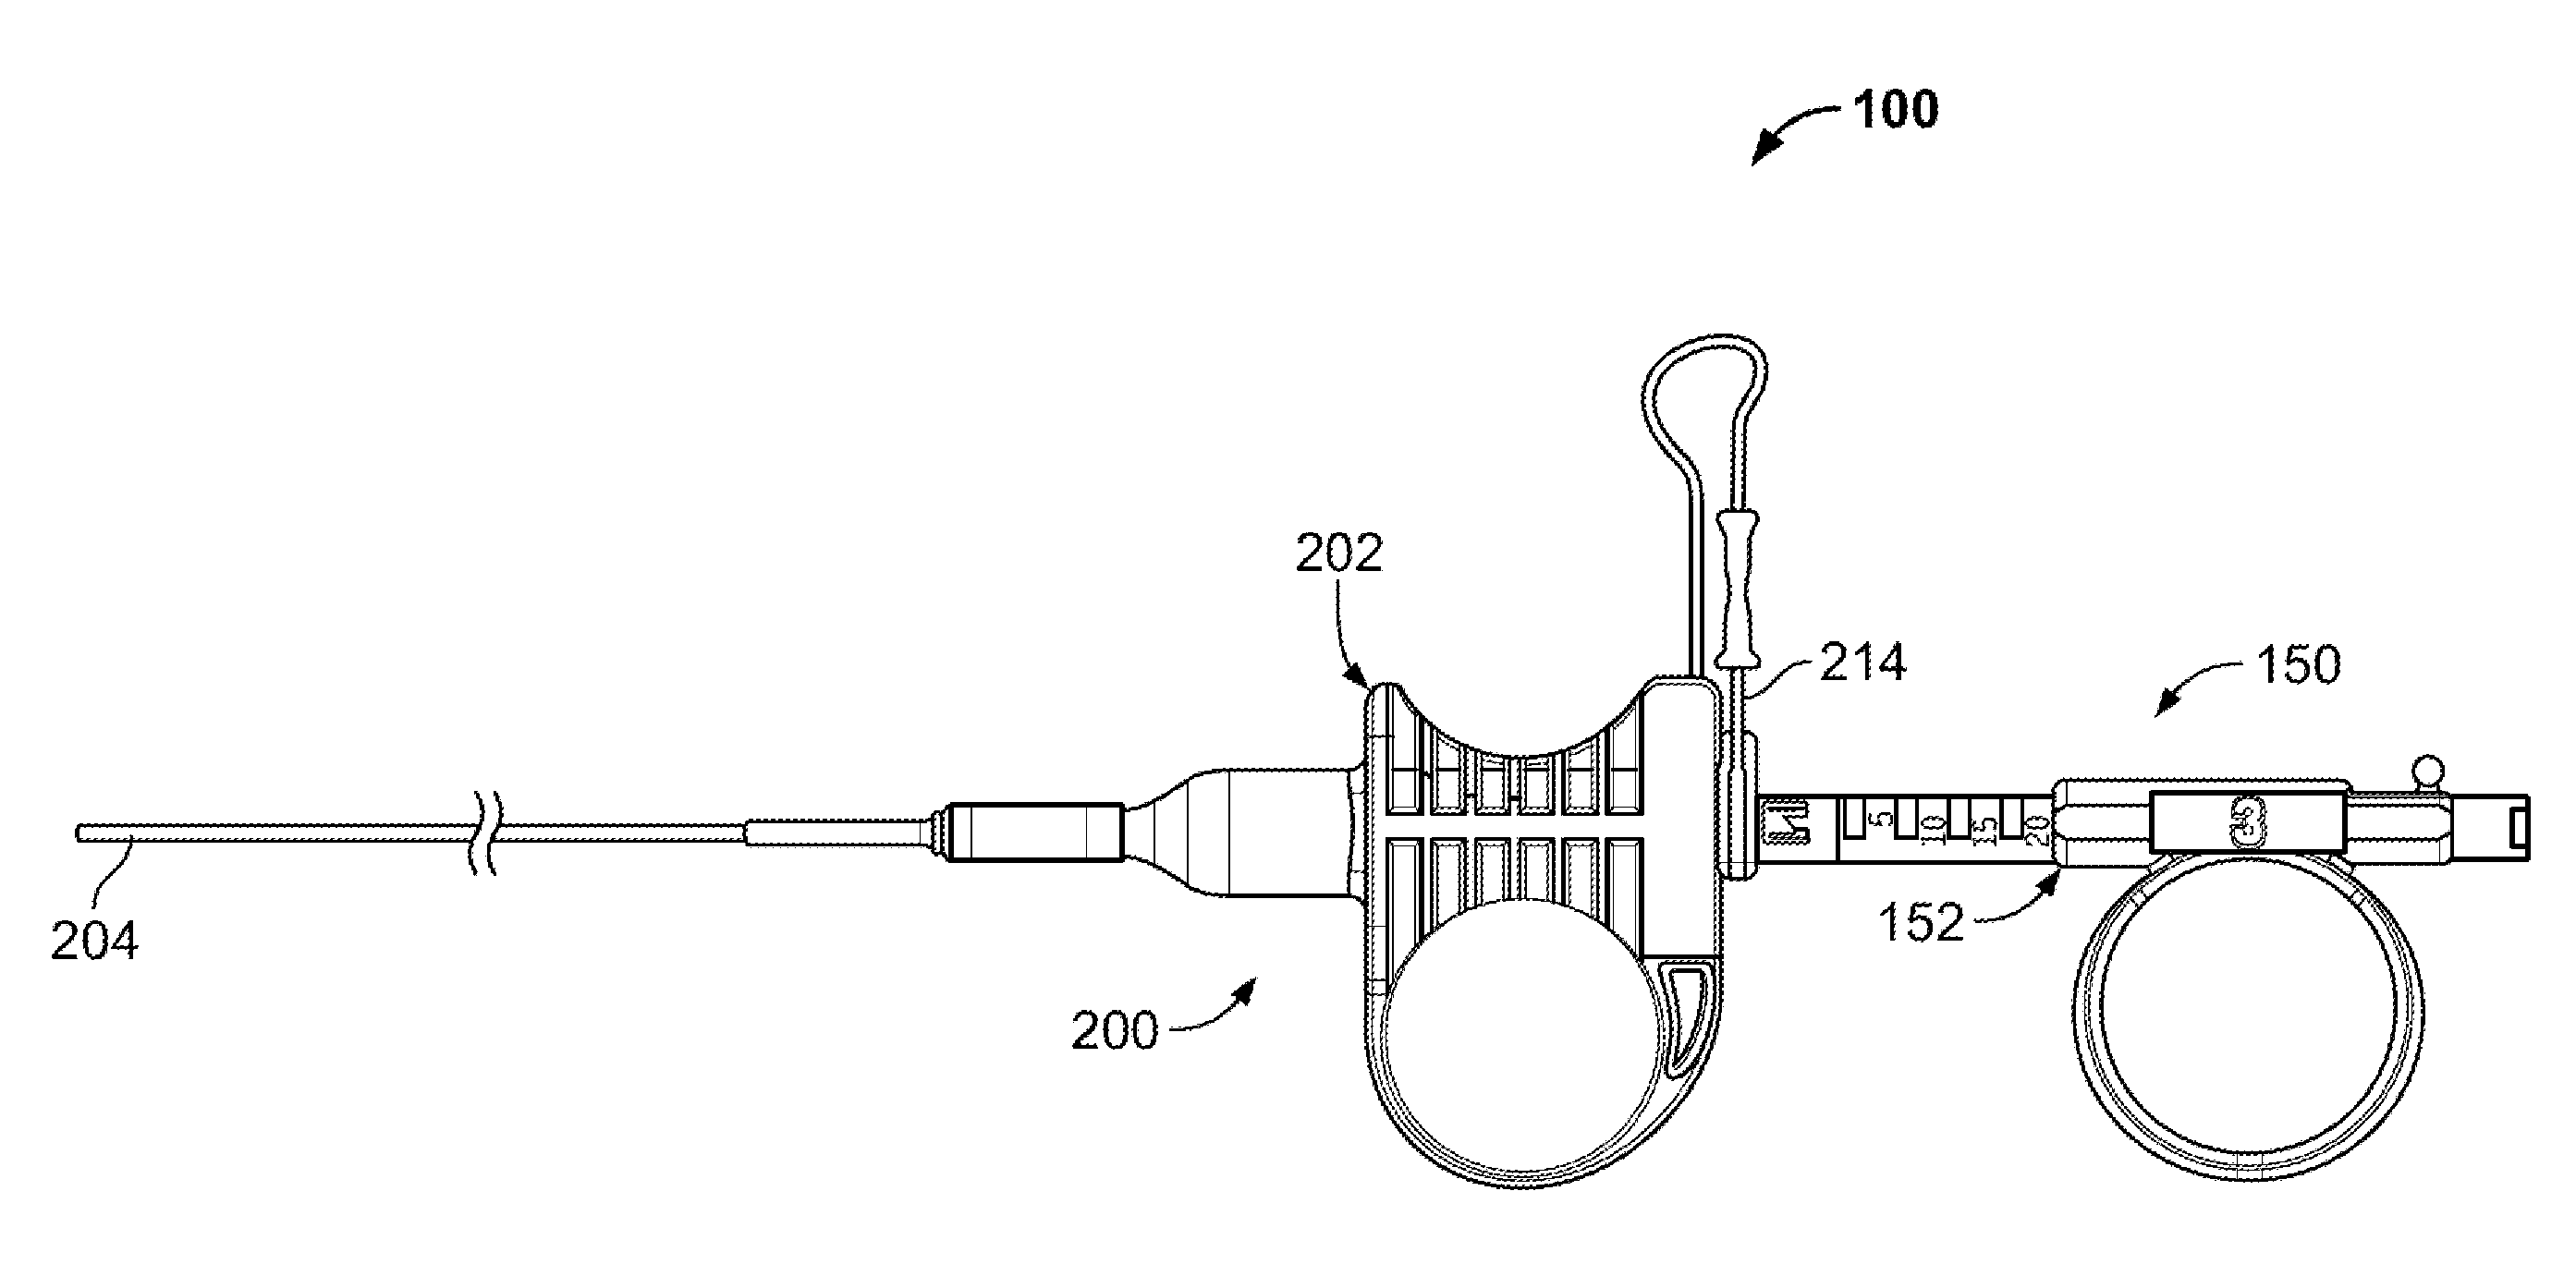 Tissue sampling devices, systems and methods